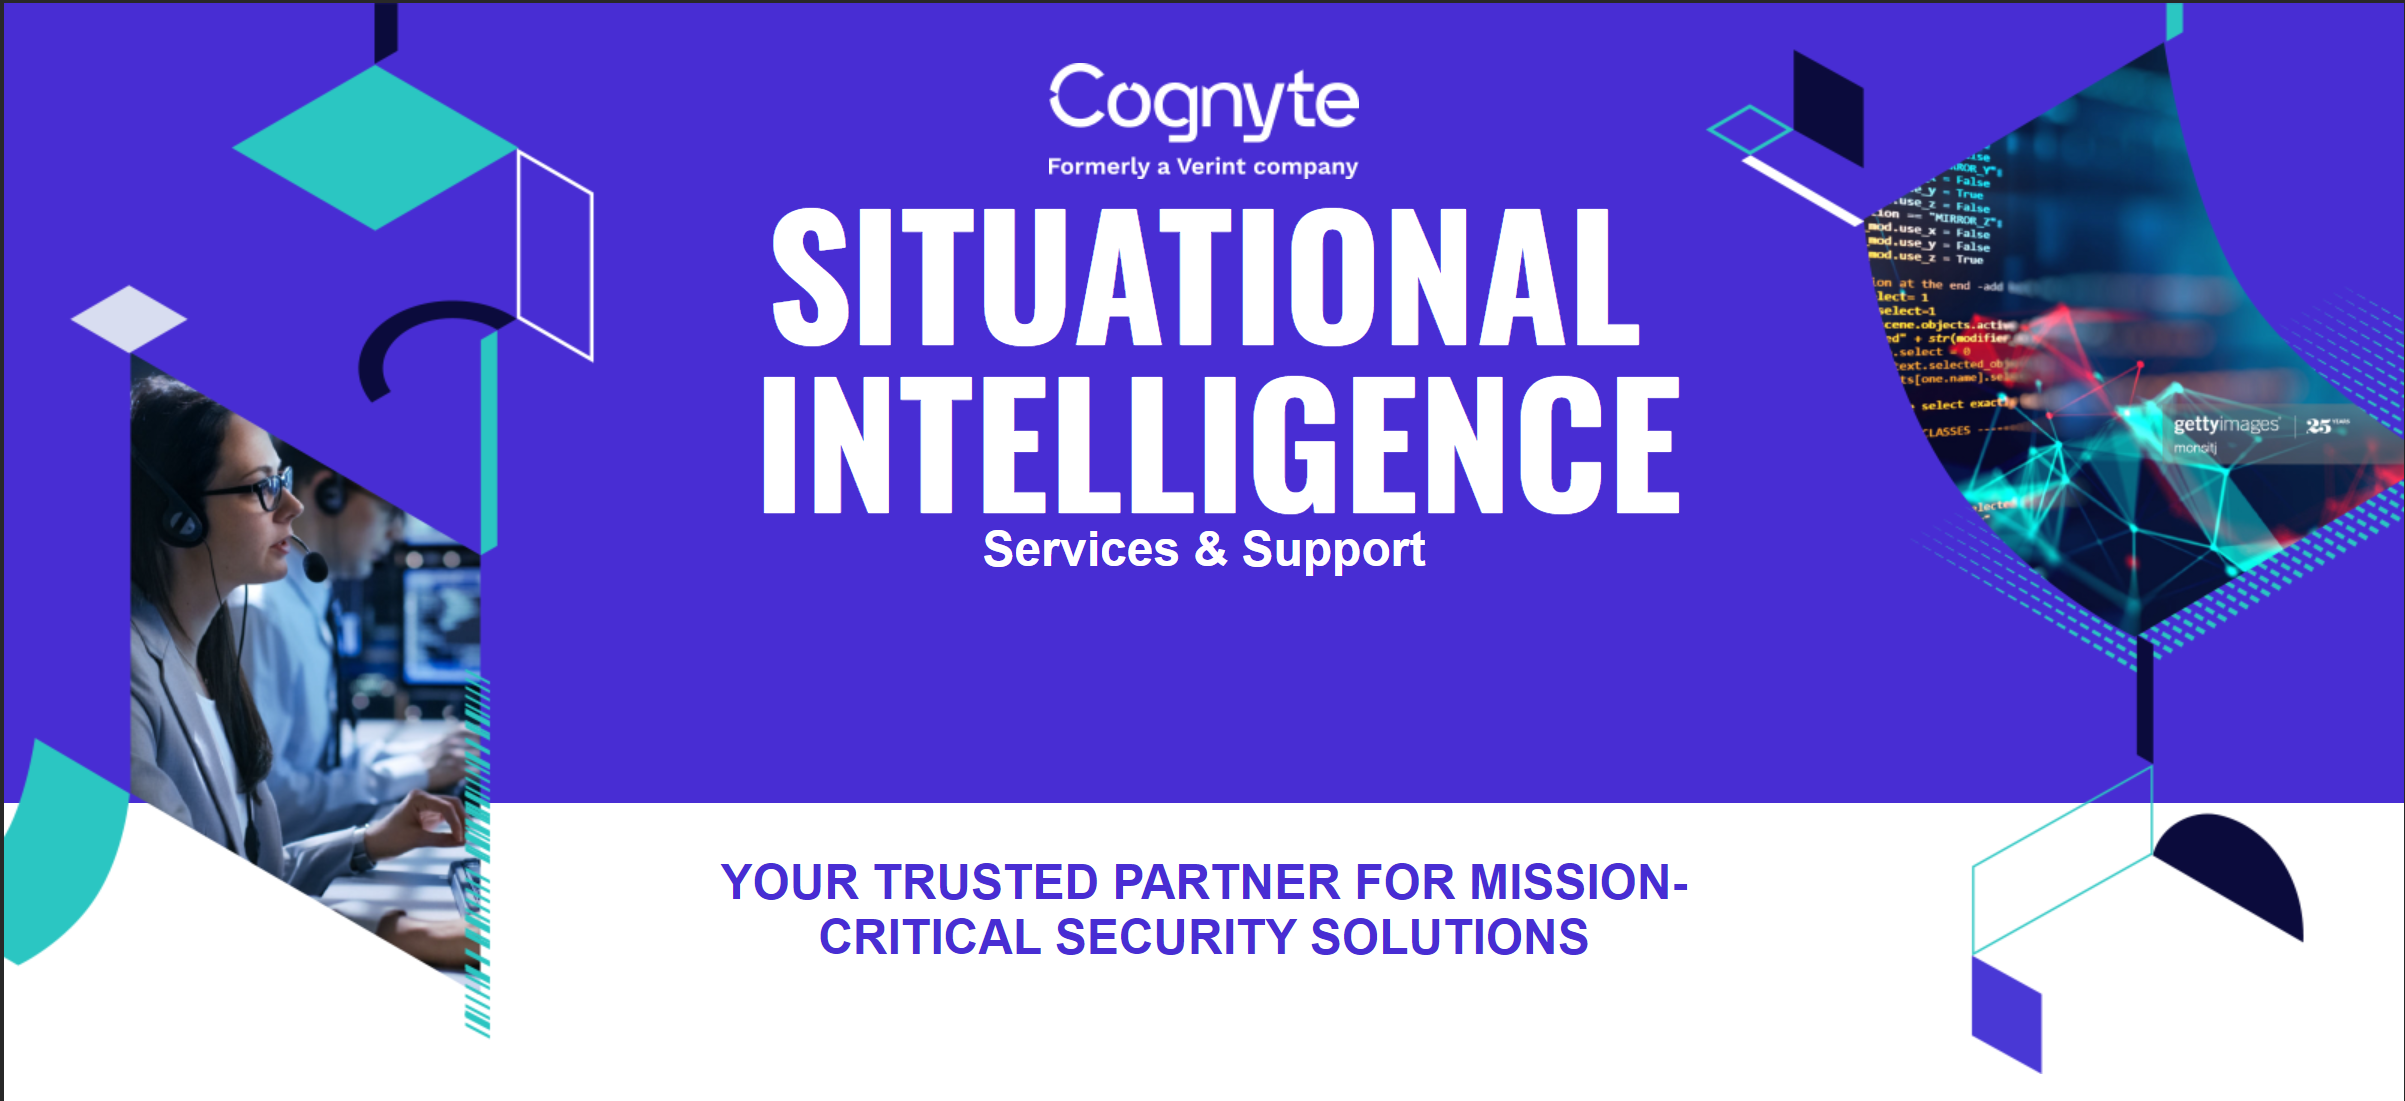 Cognyte Service and Support